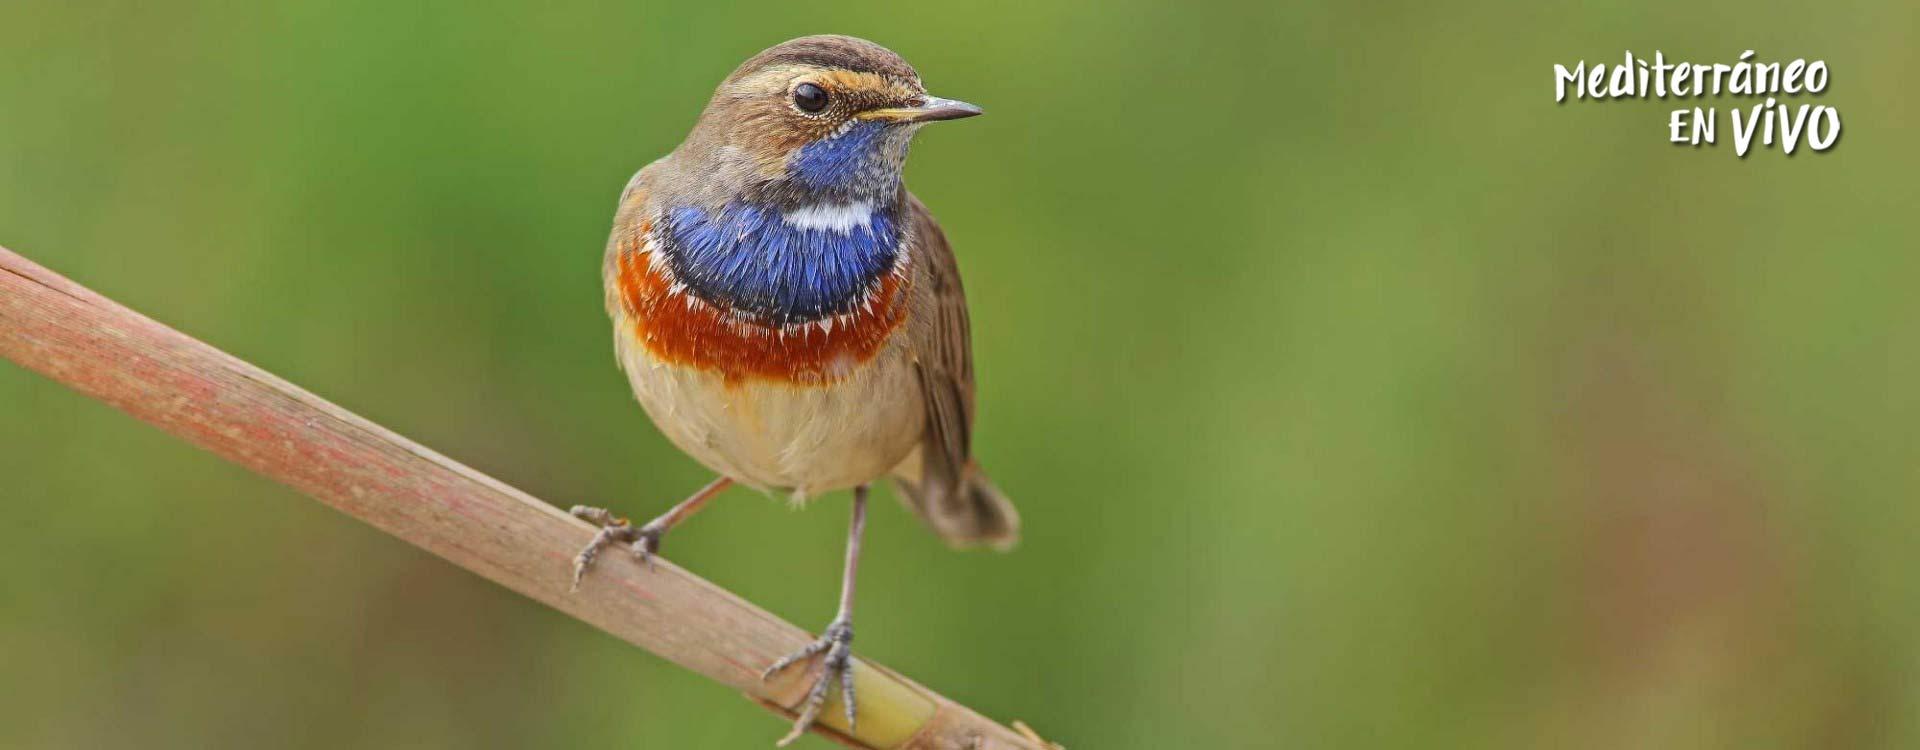 Image of a Blue-breasted Nightingale	